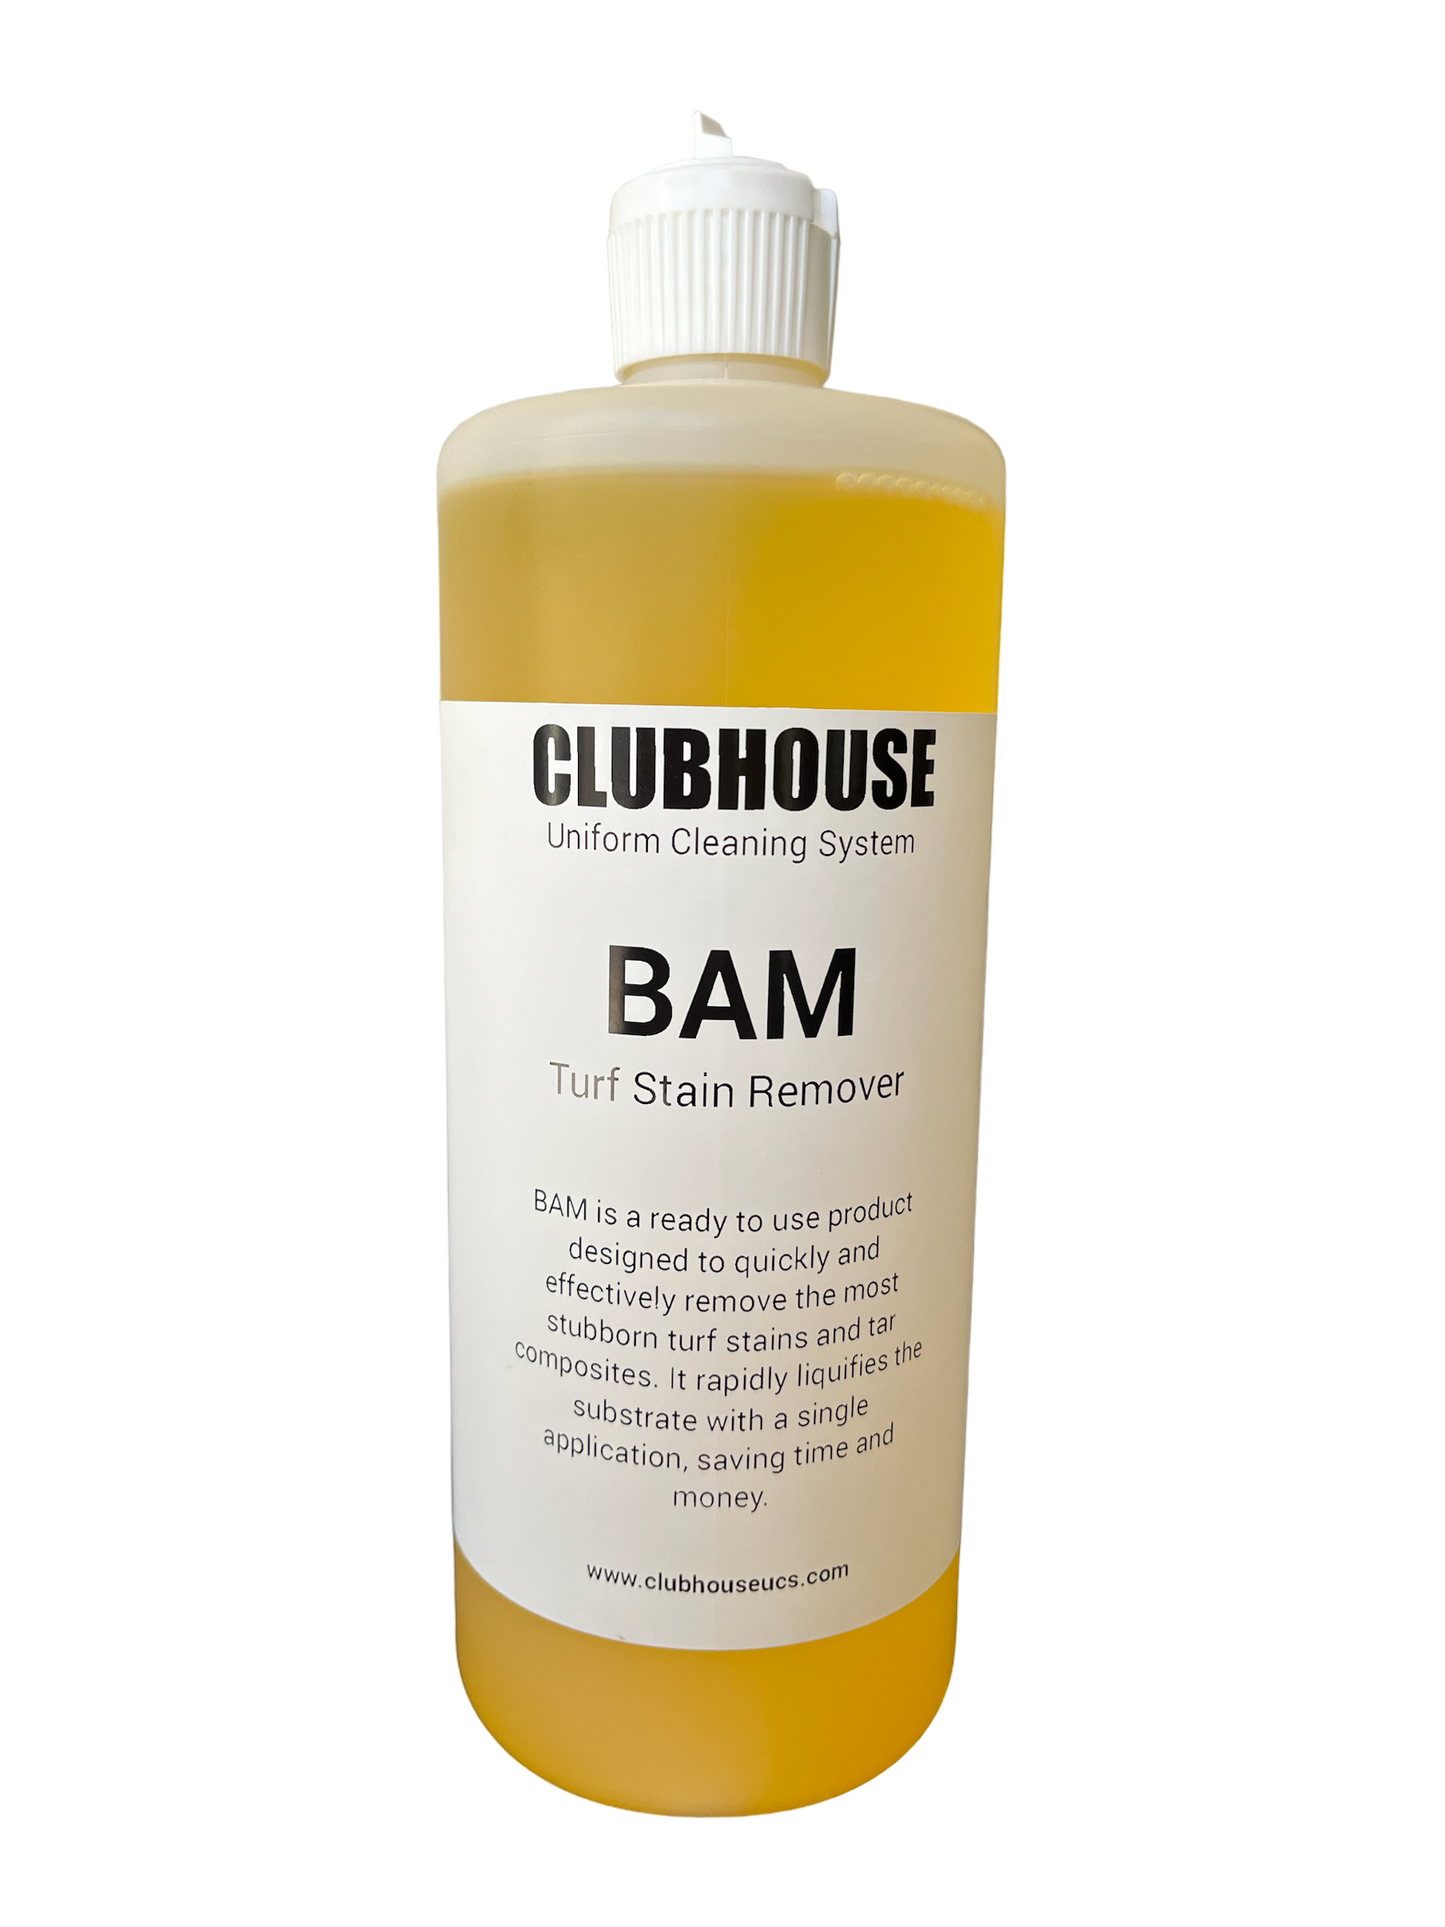 BAM - Turf Stain Remover